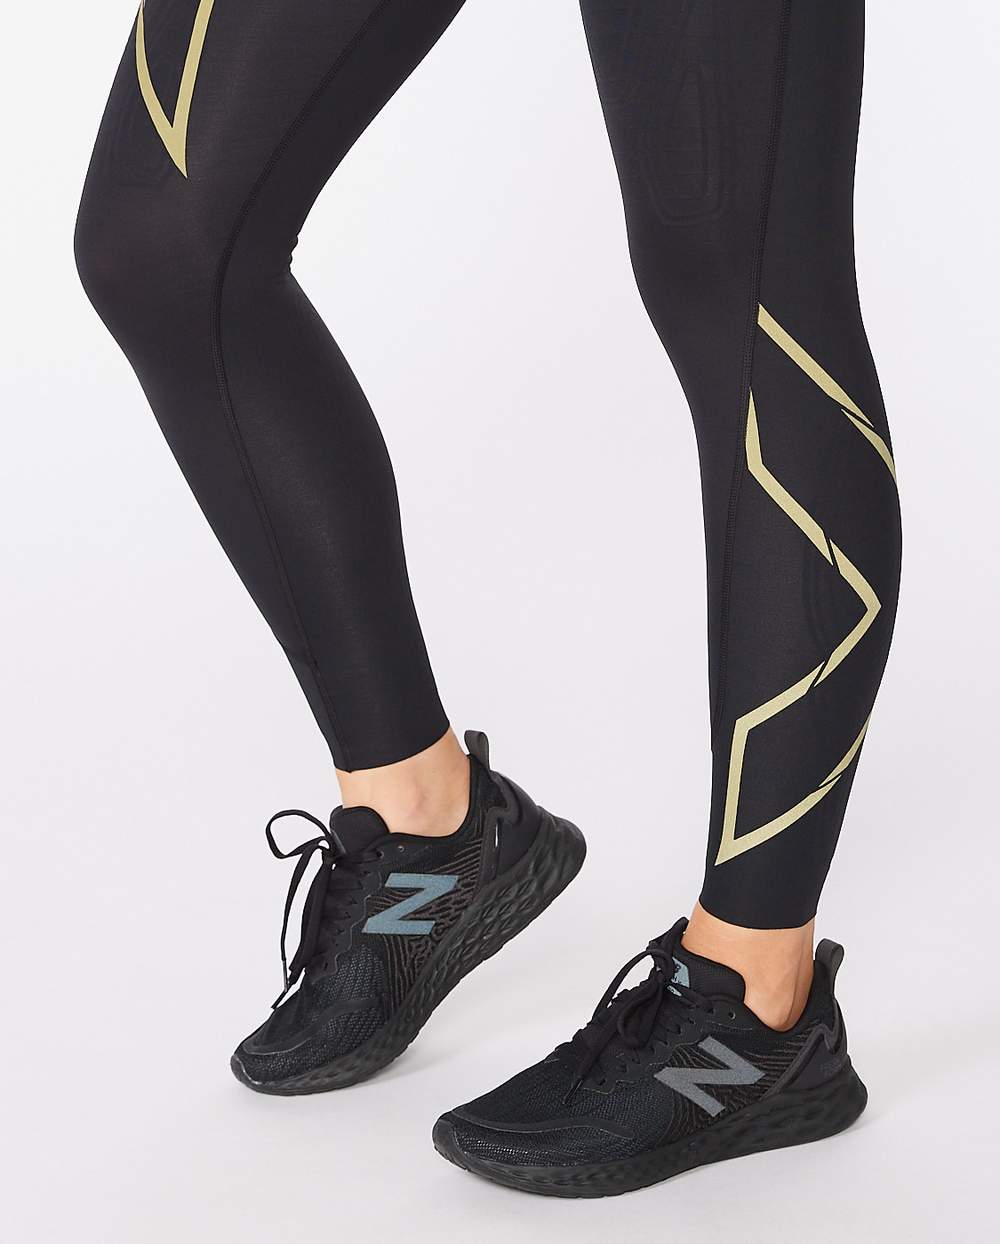 Calzas Compresión Mujer Light Speed Mid-Rise CompTight - Black/Gold Reflective - 2XU